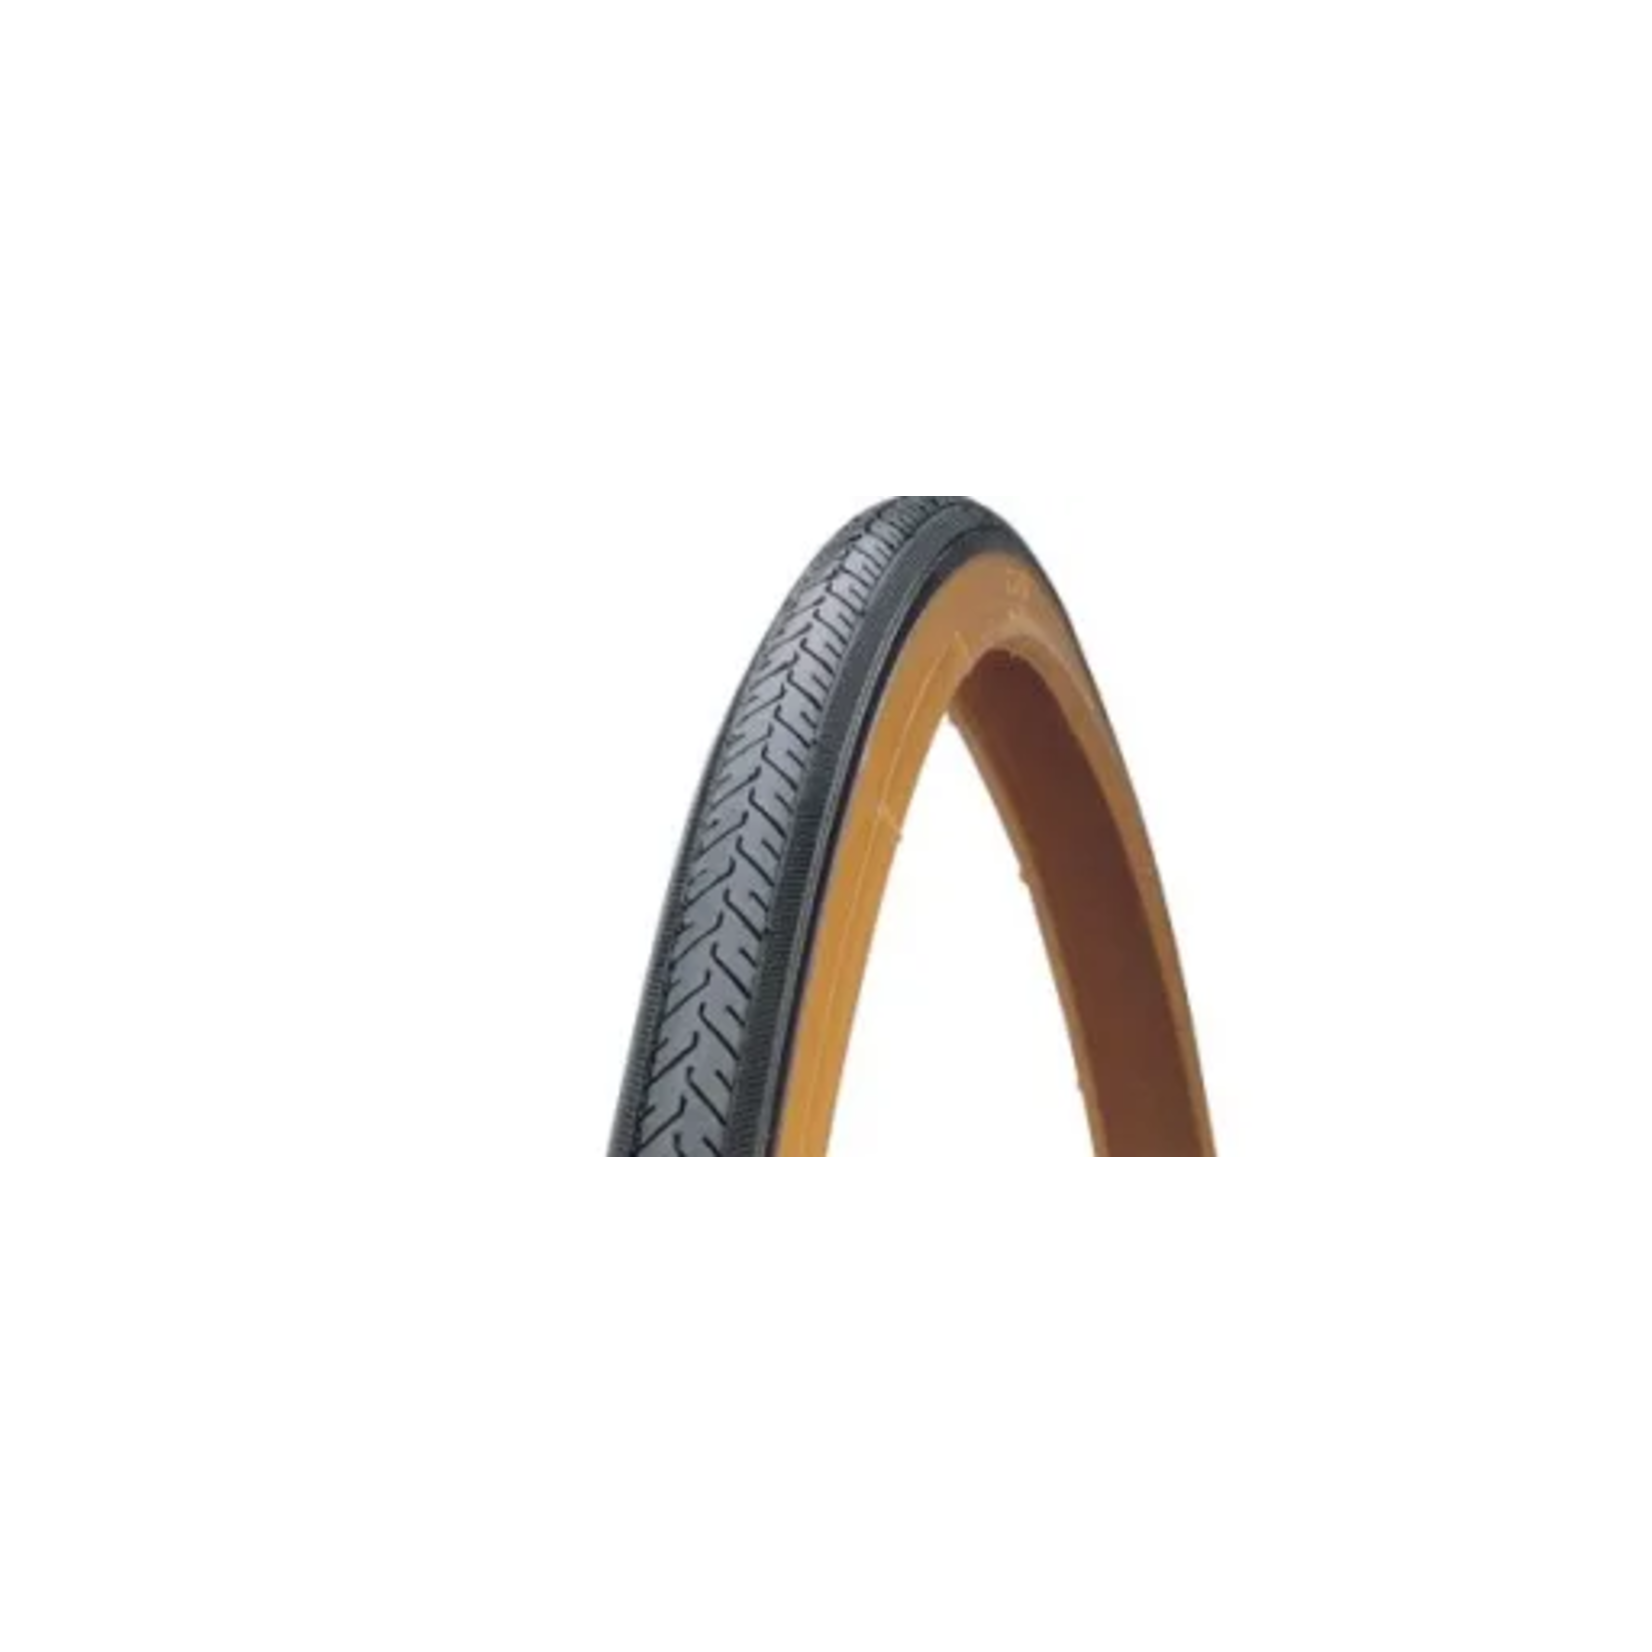 Duro Duro Bicycle Tyre - 700 x 25C - Black with Gum Wall Speed Tread 95 PSI - Pair